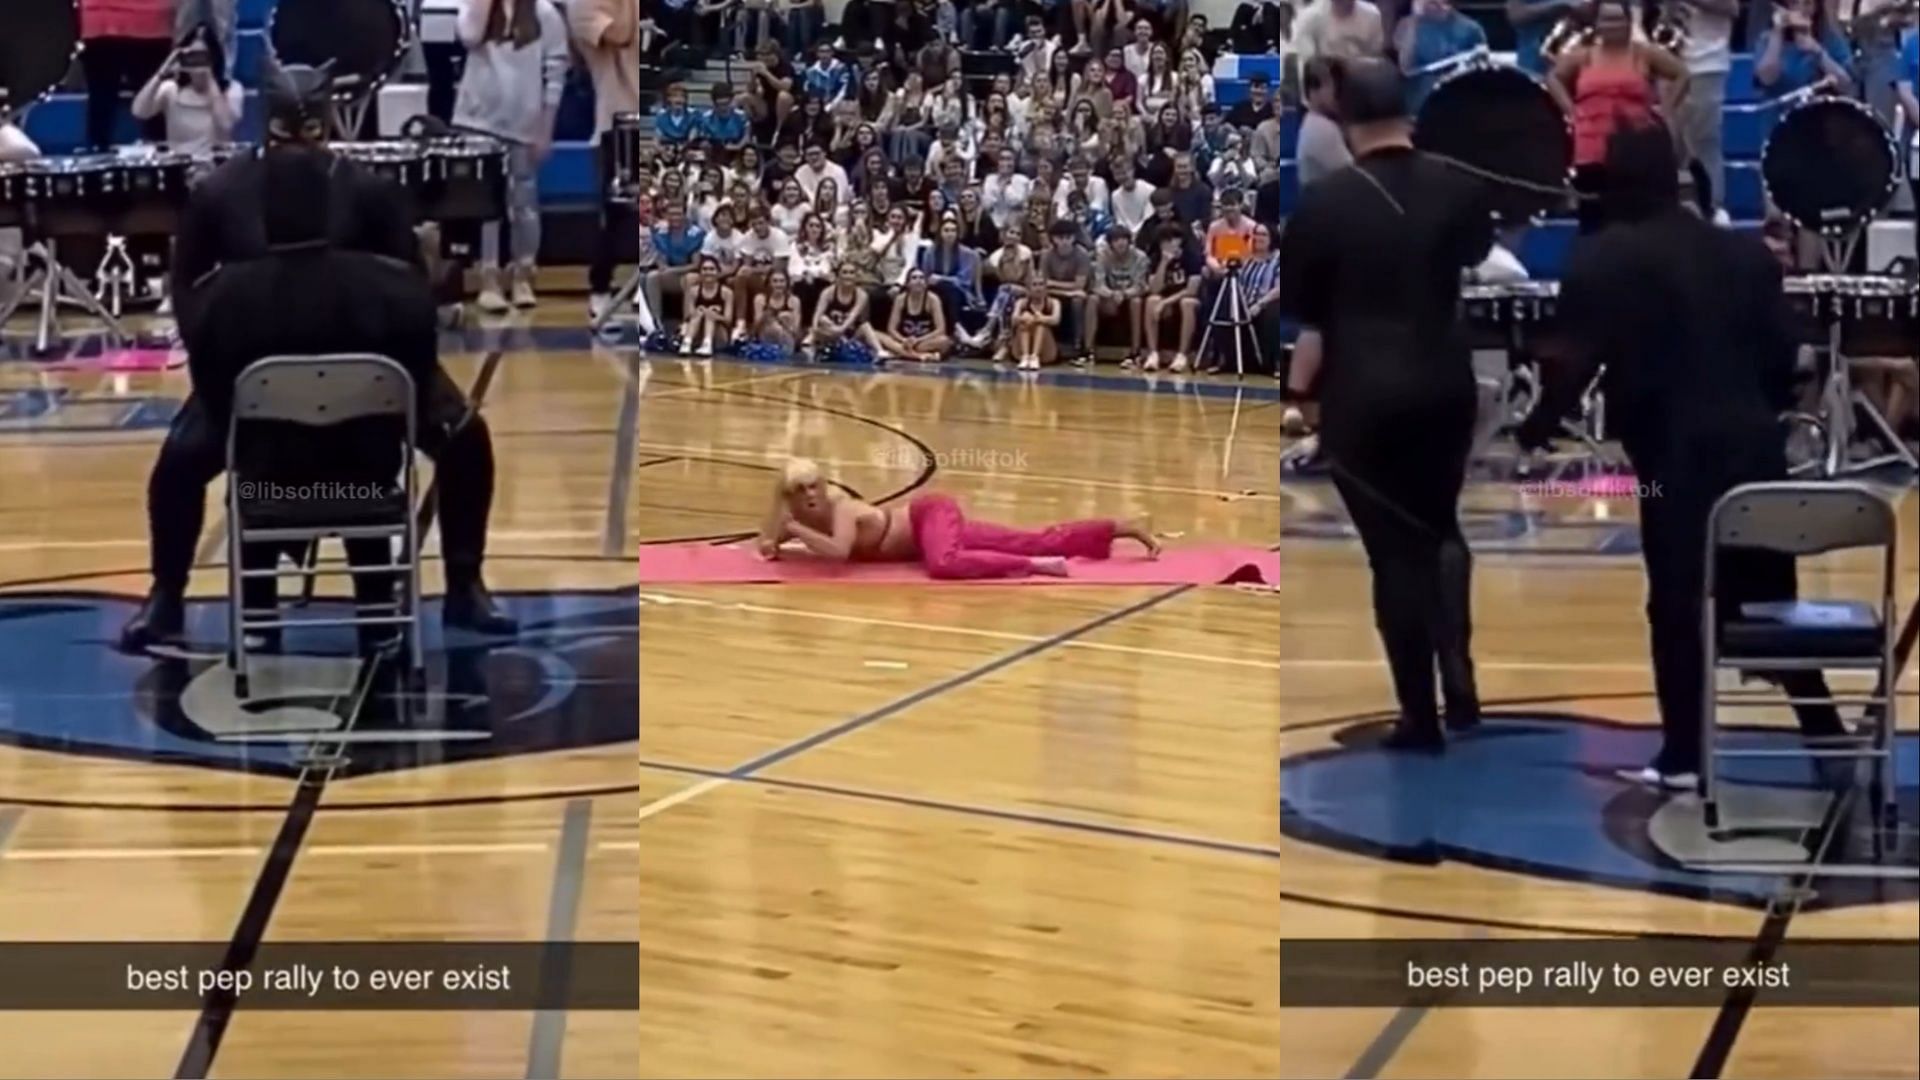 "How is this not a felony?" Oak Grove High School Pep Rally video goes